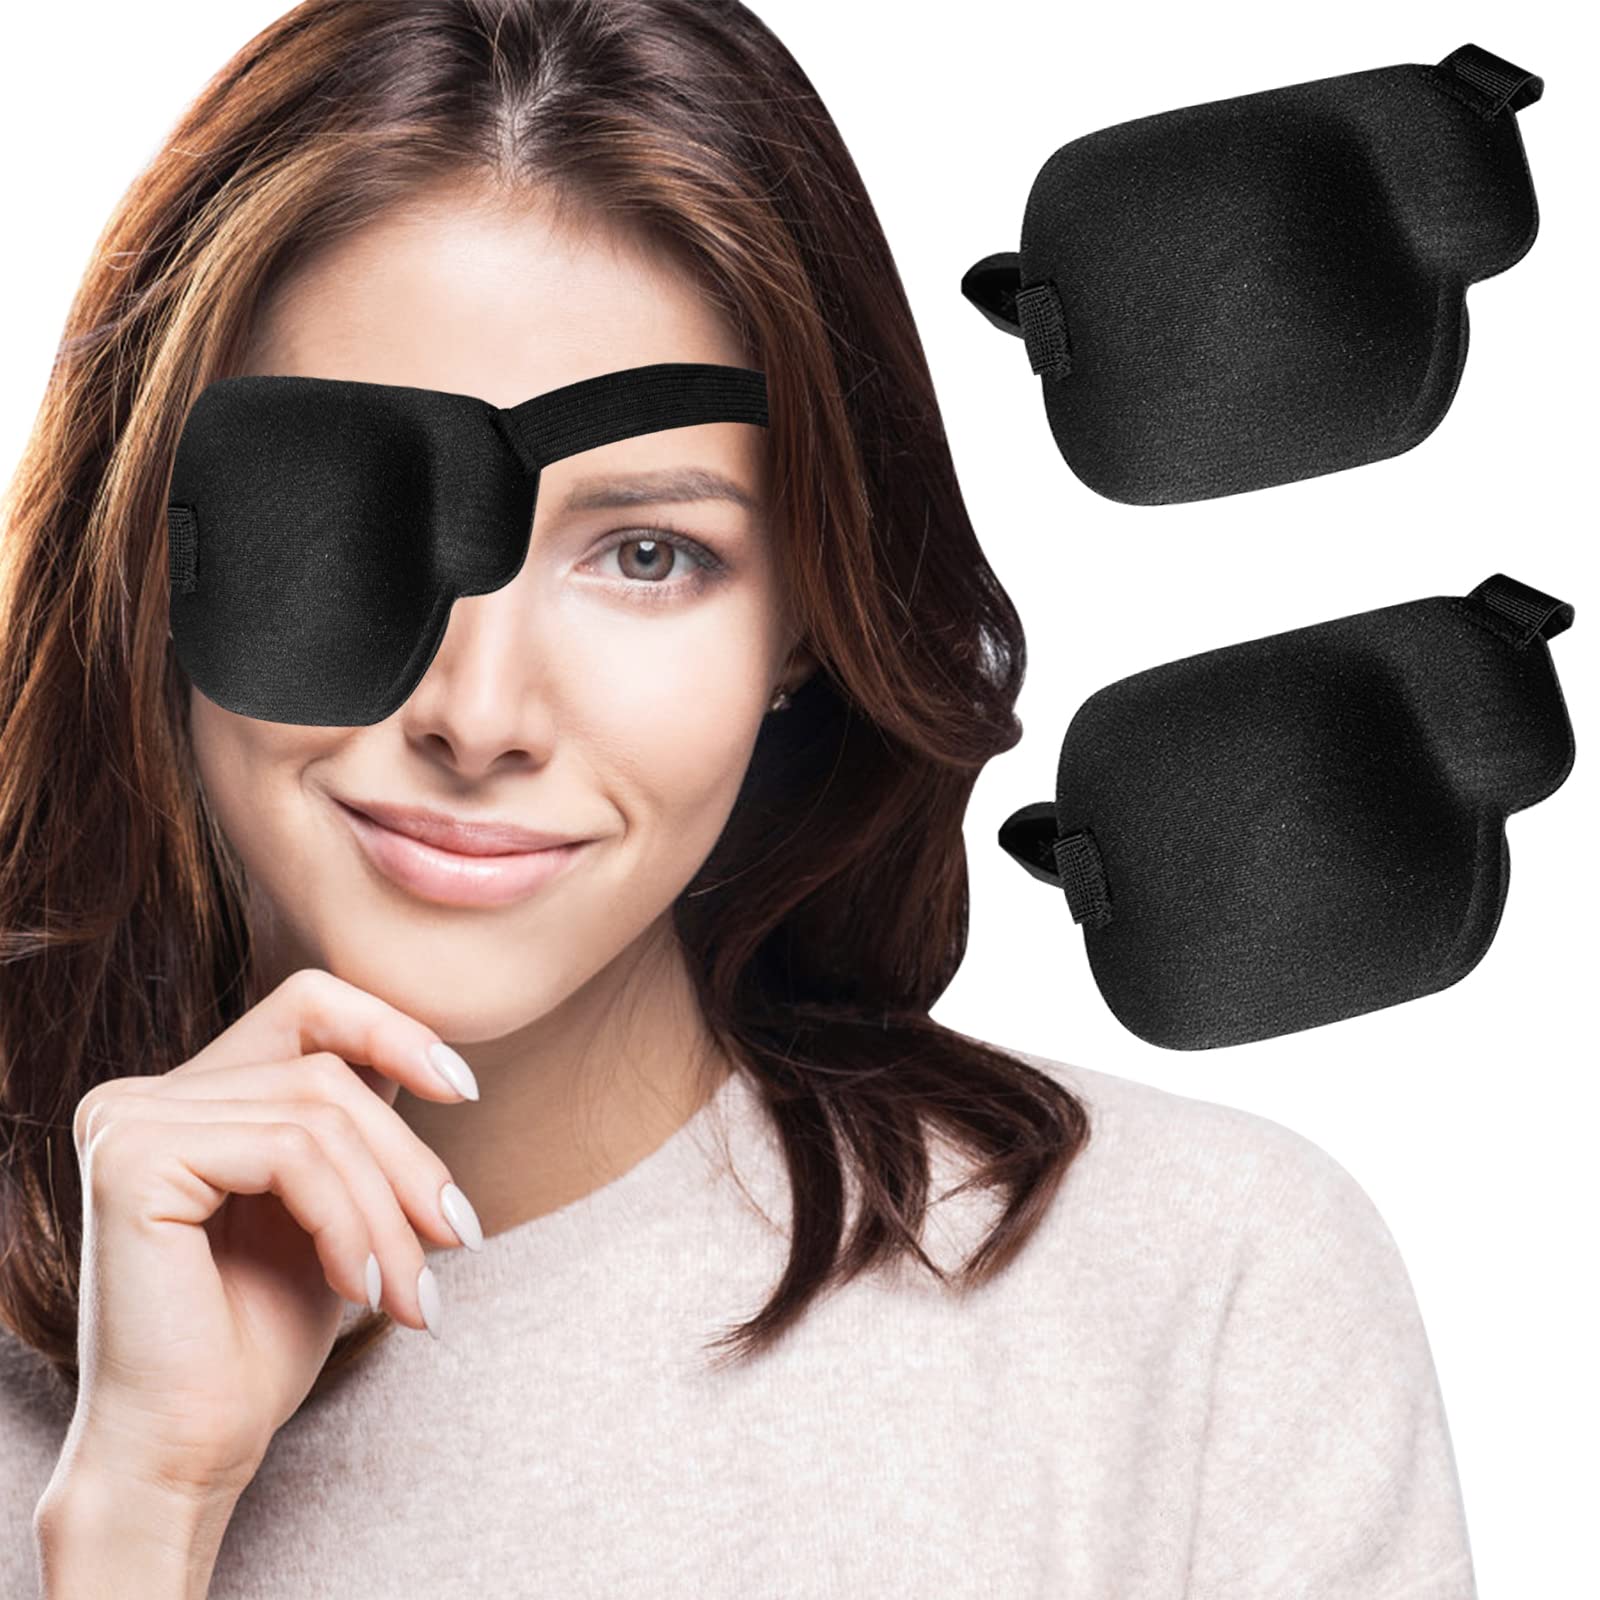 RIKEYO 2Pcs 3D Eye Patches for Adults, Adjustable Medical Eyepatch for ...